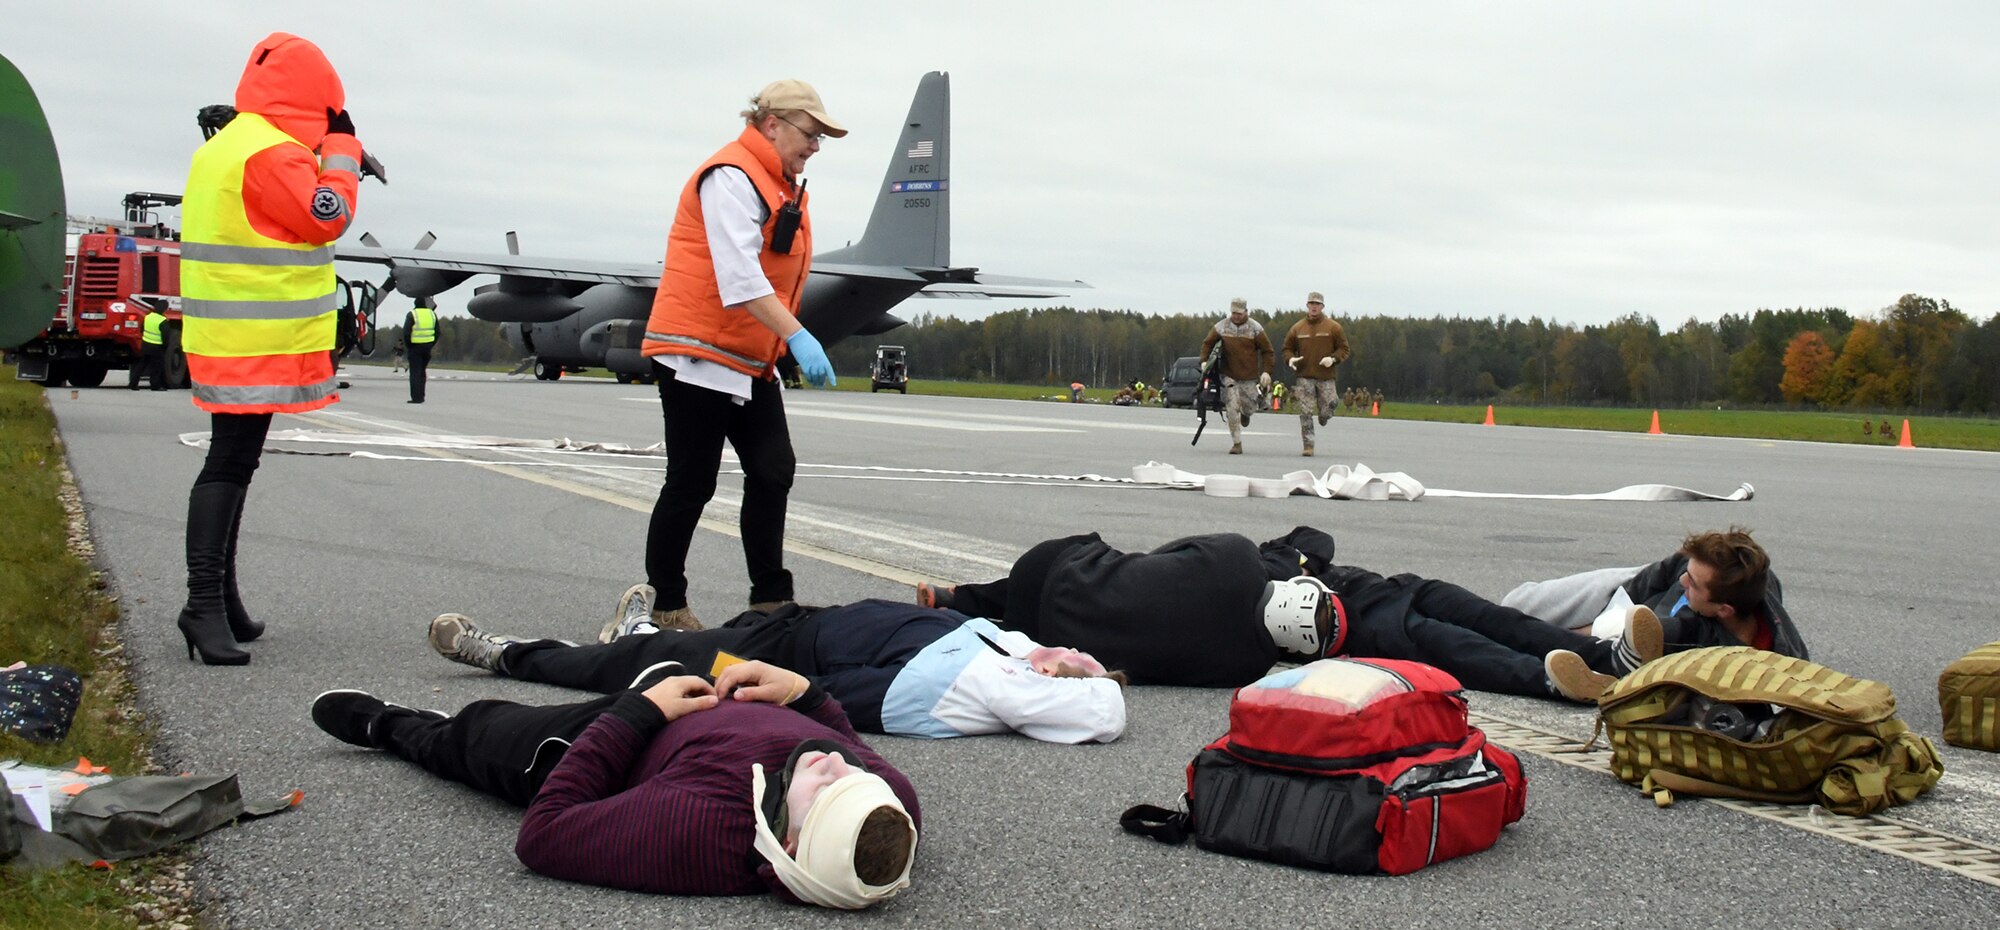 Latvian civil-military participants of Sky Fist, an aircraft mishap training exercise, held at Lielvarde Air Base, Latvia, await rescue during a simulated crash scenario, Oct. 6. 2016.  The 94th Airlift Wing from Dobbins Air Reserve Base, Ga., represented the U.S. Air Force in the bilateral training exercise designed to strengthen the partnership between the U.S. and Latvia. (U.S. Air Force photo by Staff Sgt. Alan Abernethy)